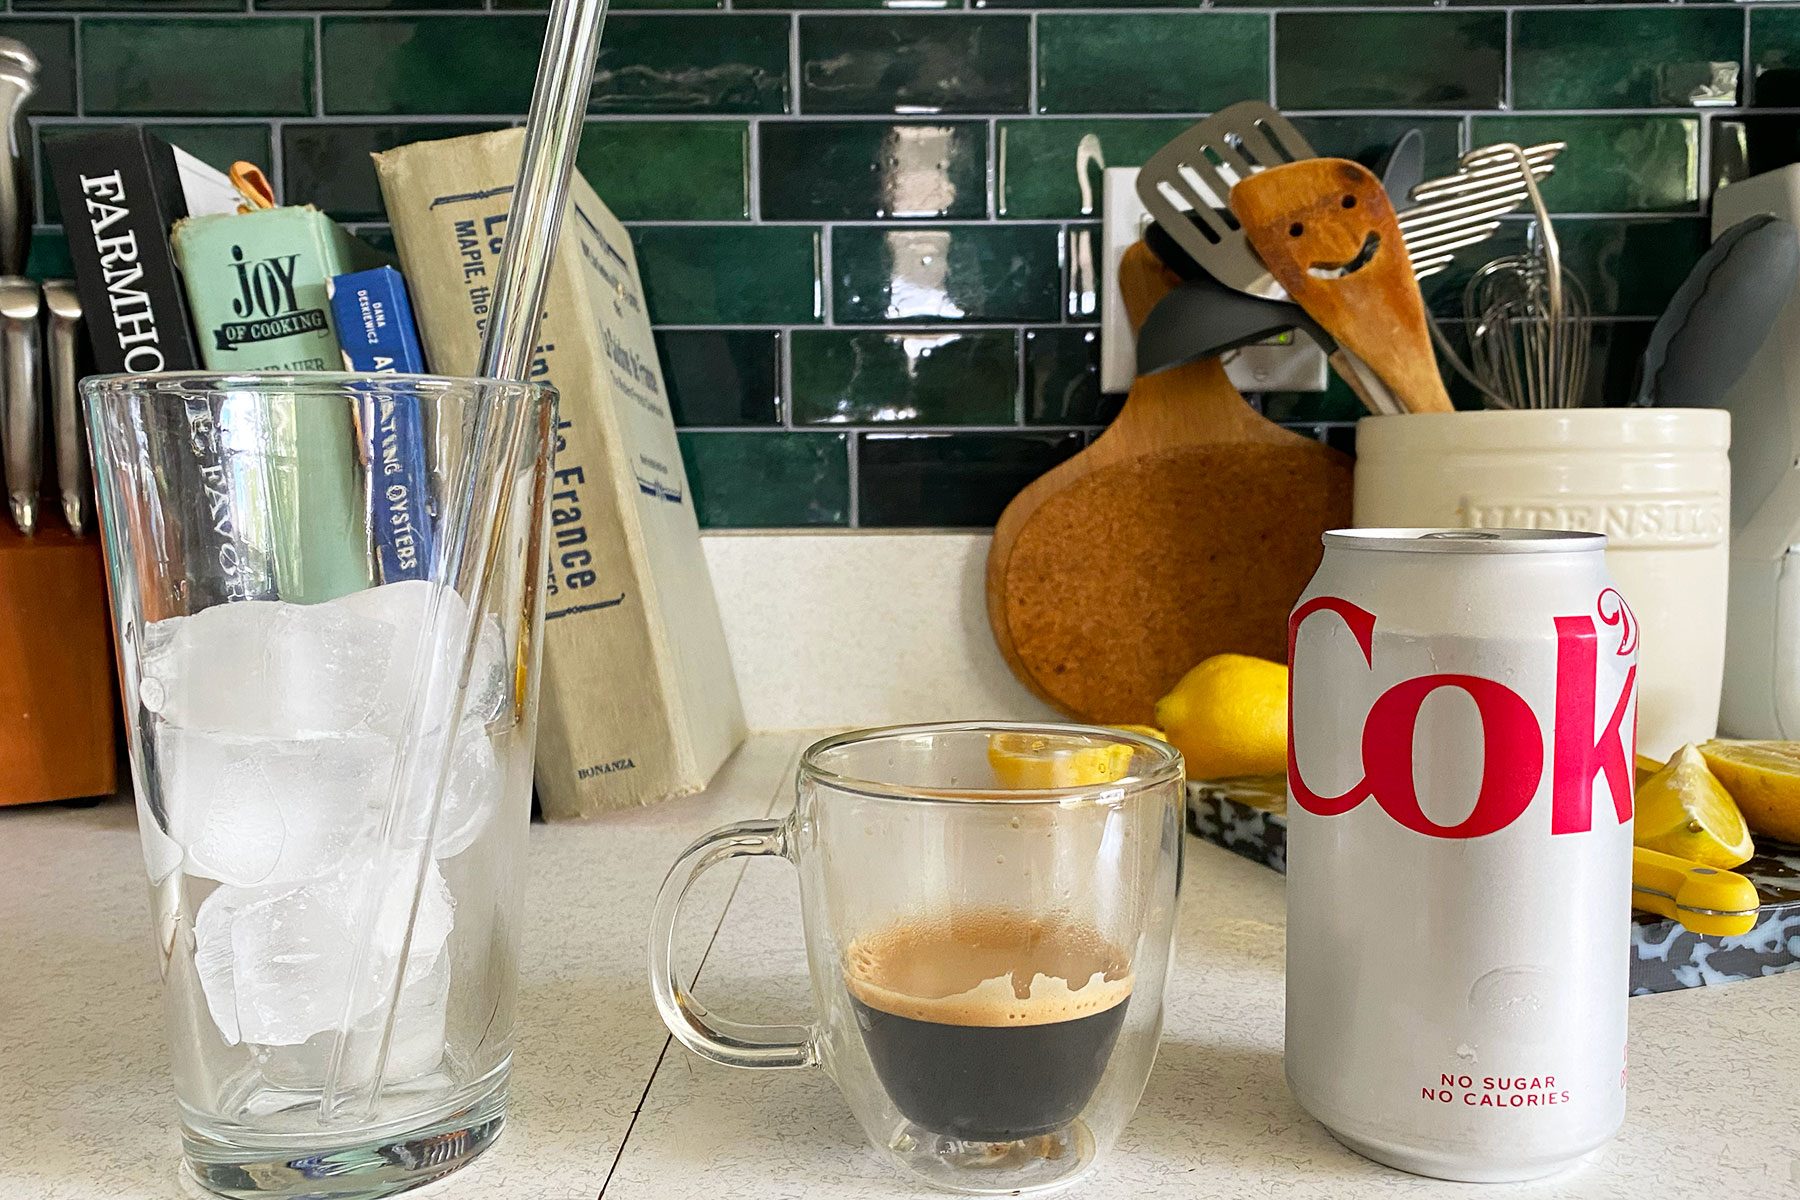 Ingredients for a Diet Coke And Espresso